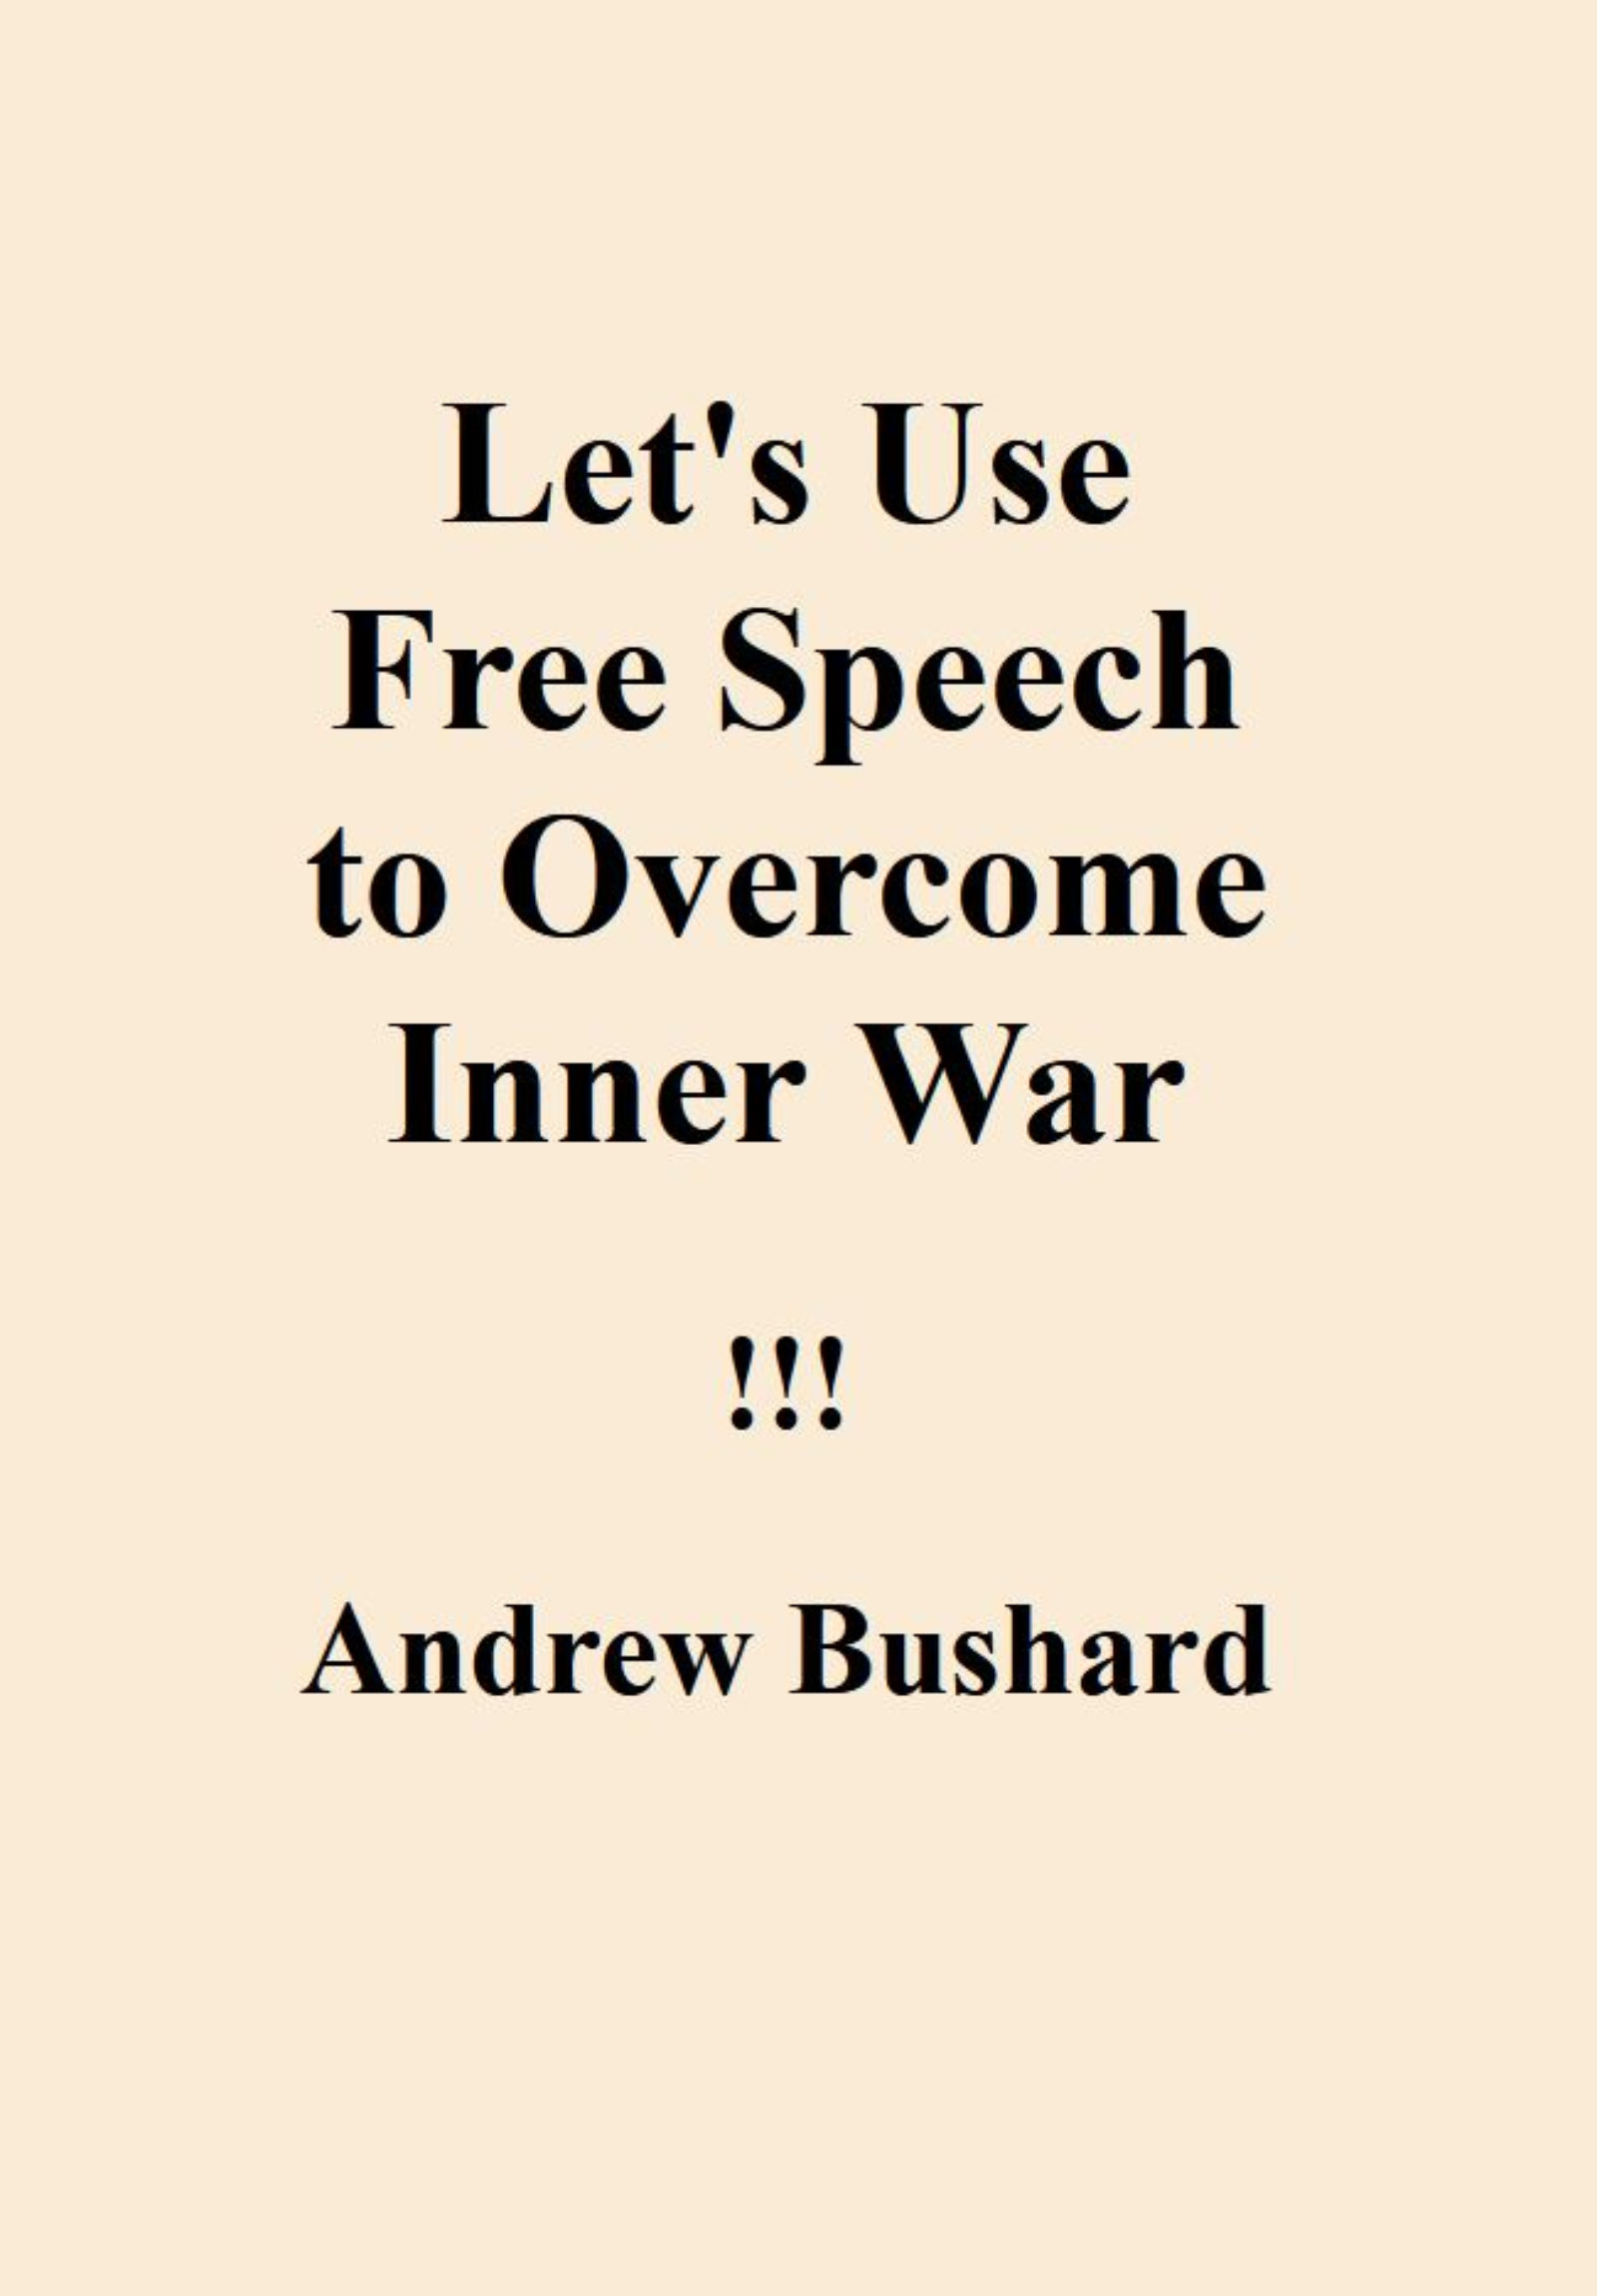 Let's Use Free Speech to Overcome Inner War's featured image